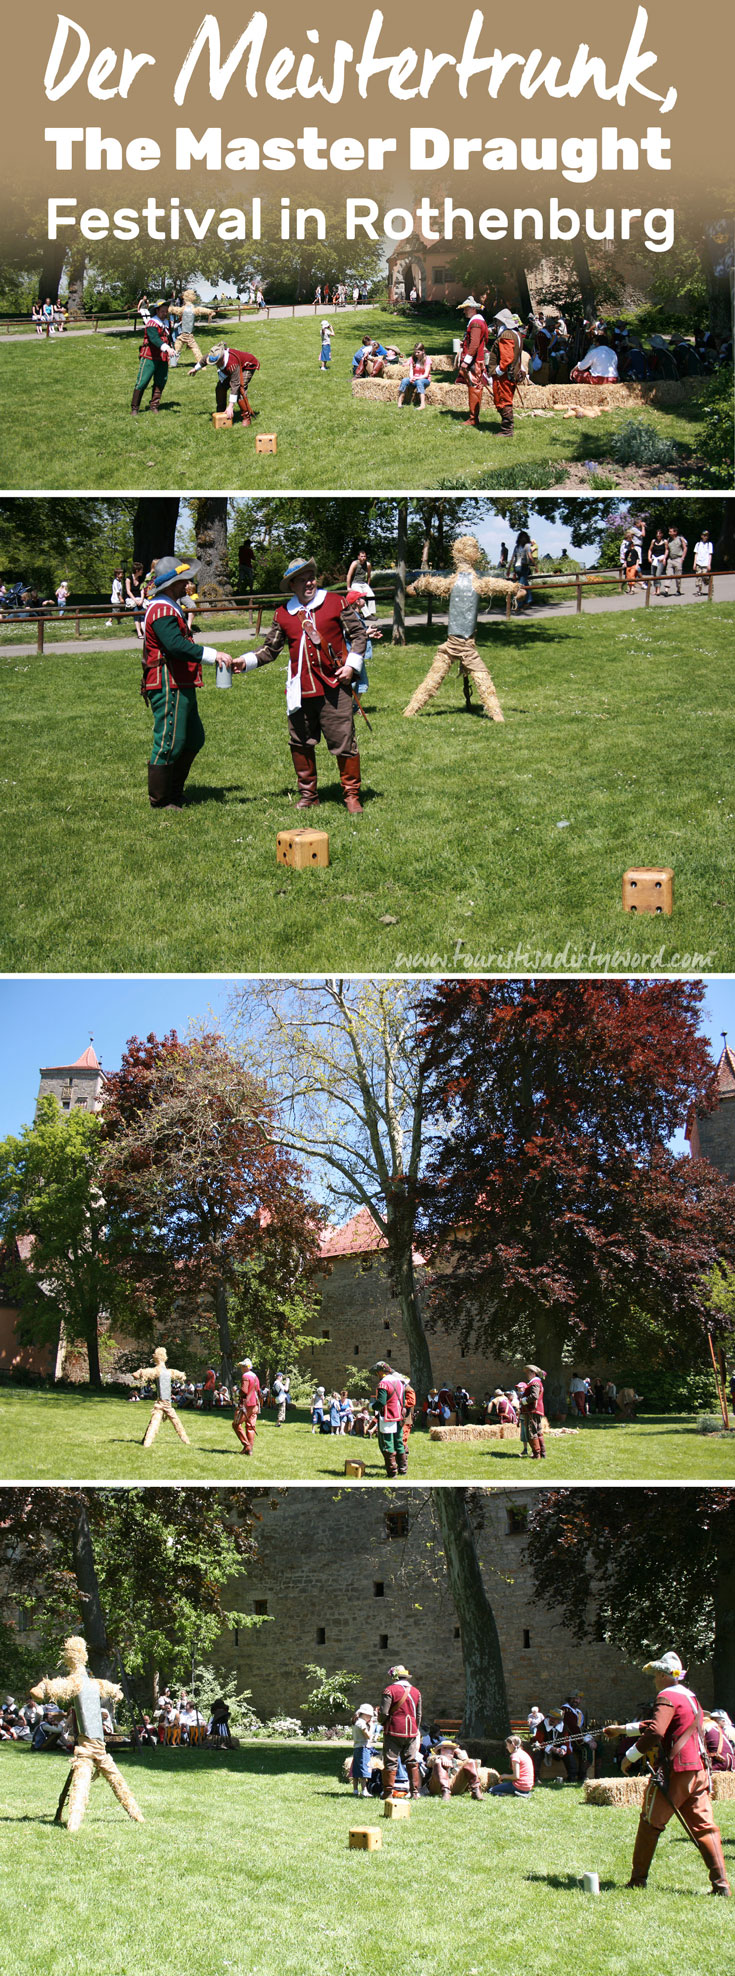 Along the historic town wall of Rothenburg, re-enactors demonstrate lawn games during the Master Draught Festival